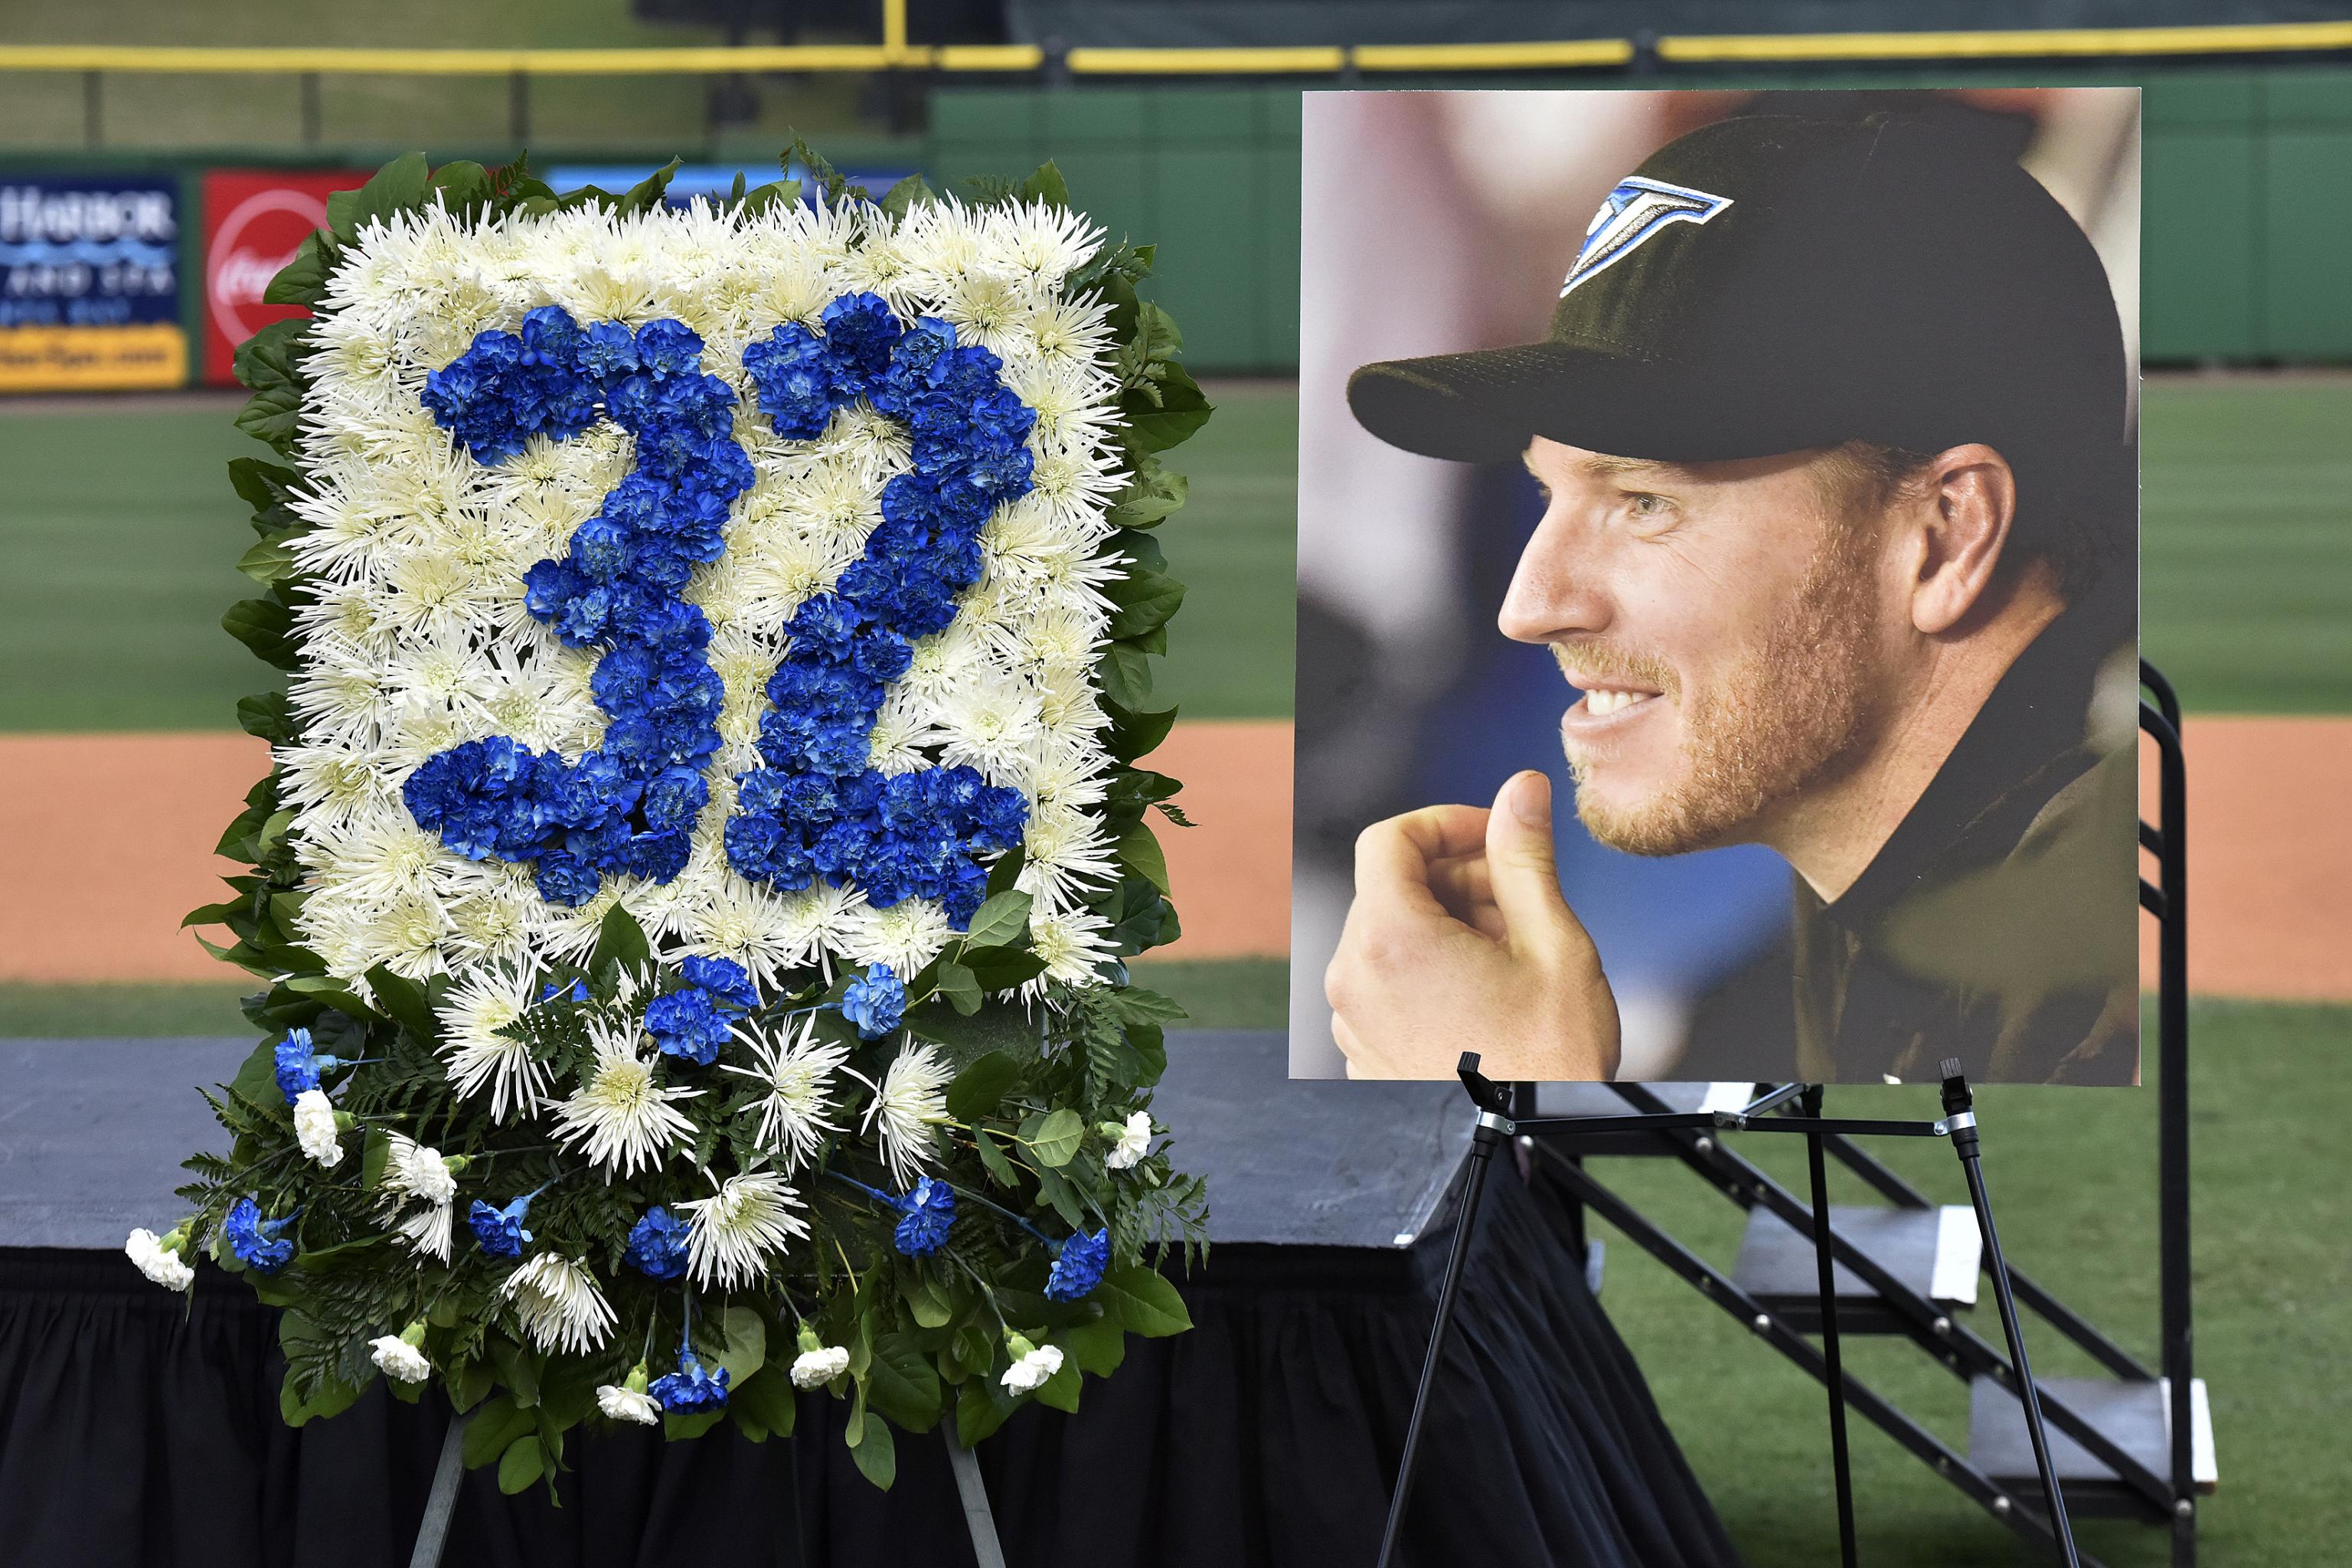 Blue Jays to honour Roy Halladay on opening day 2018